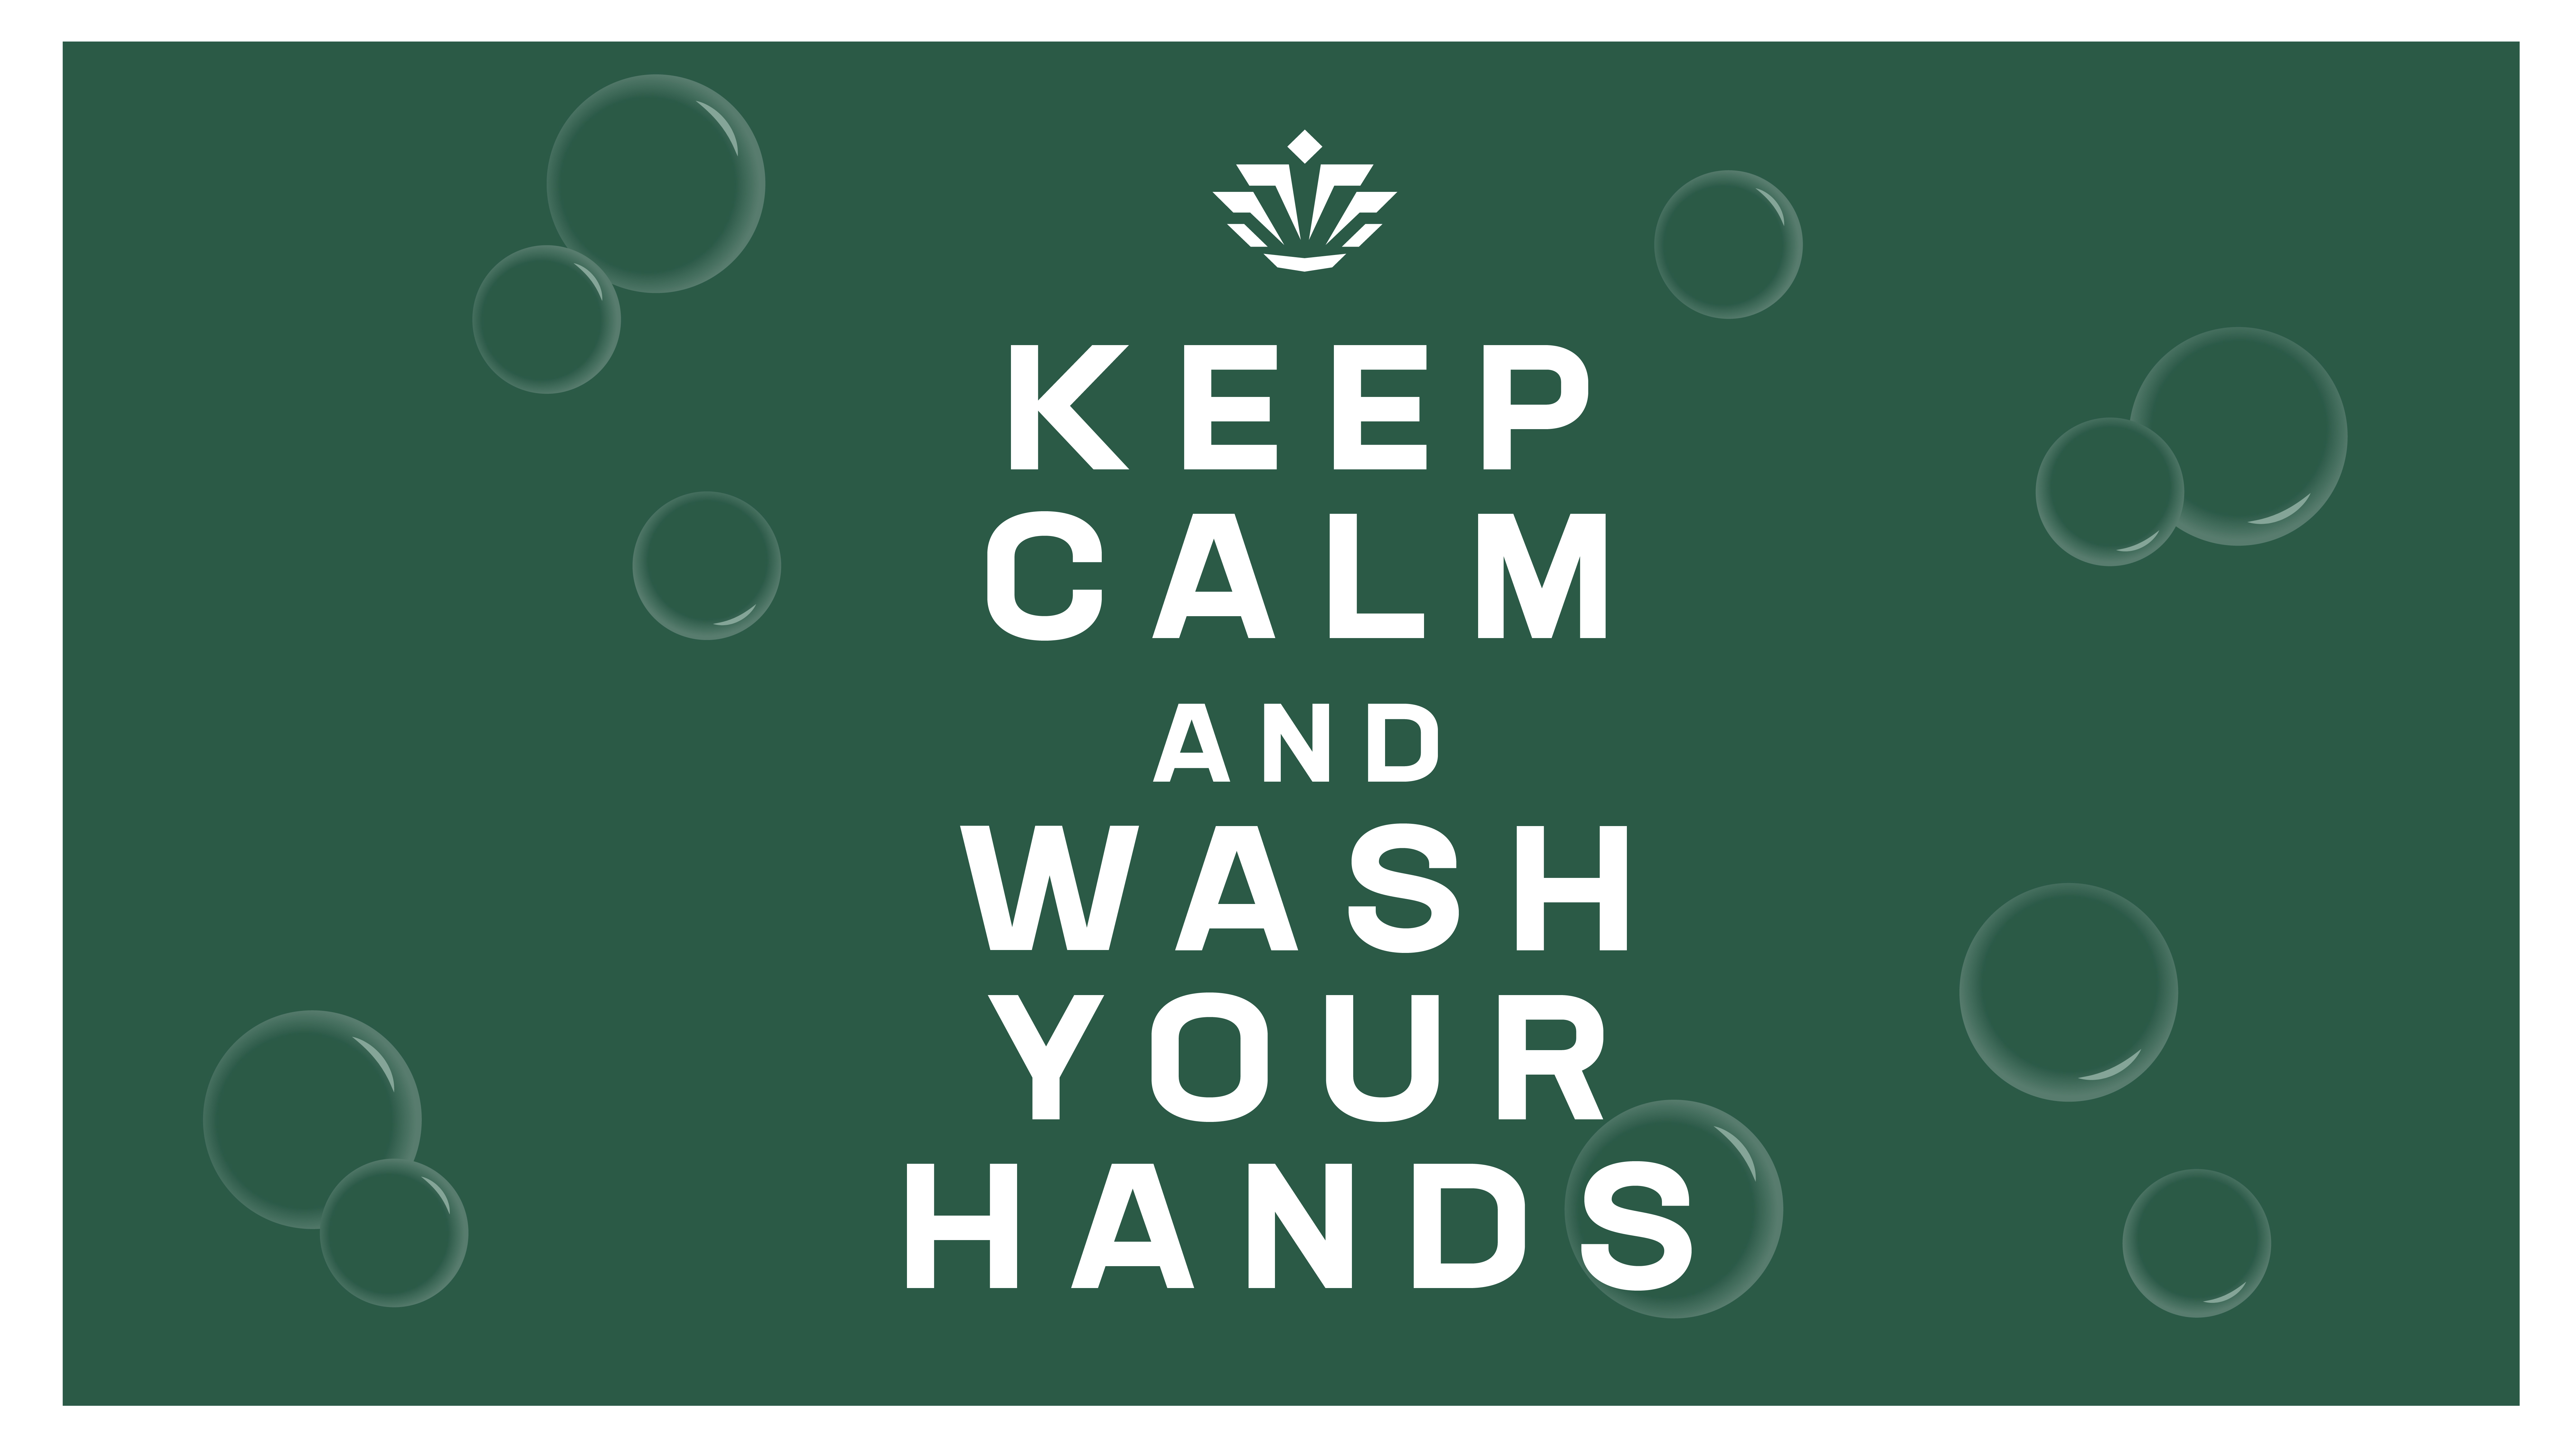 "Keep Calm and Wash Your Hands" on Niner green background color with UNC Charlotte crown logo and light bubbles in the background